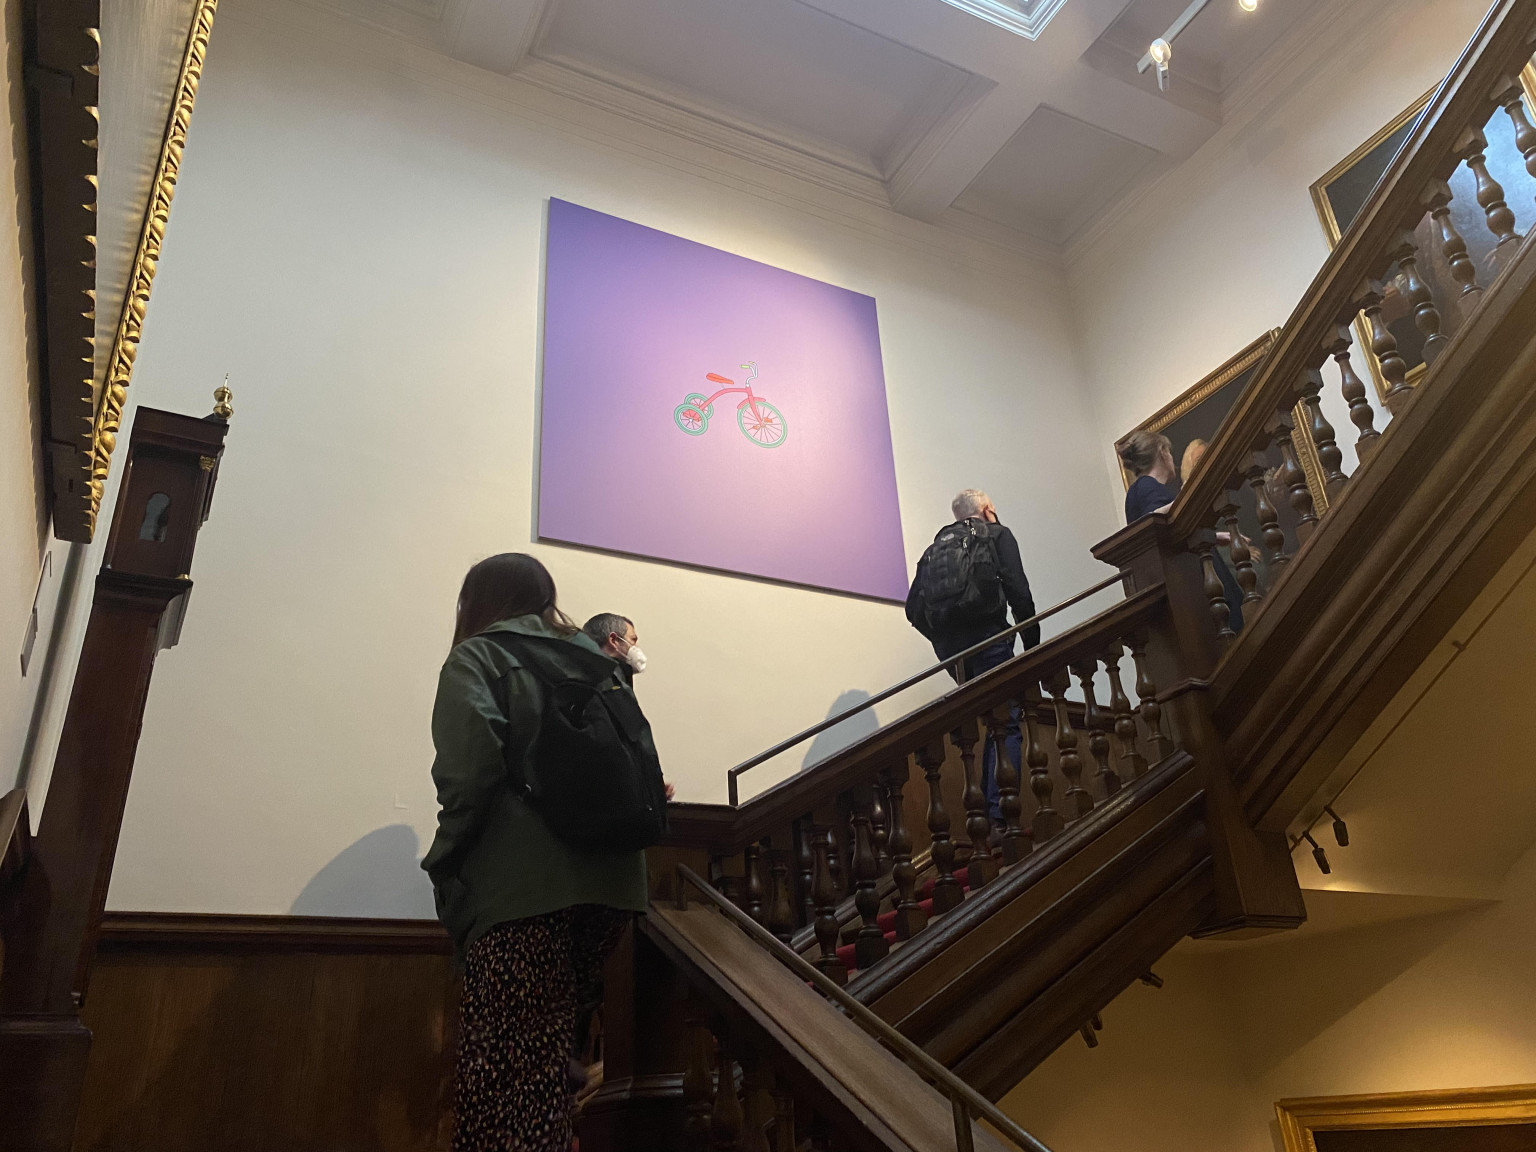 A piece by artist Michael-Craig Martin up the staircase